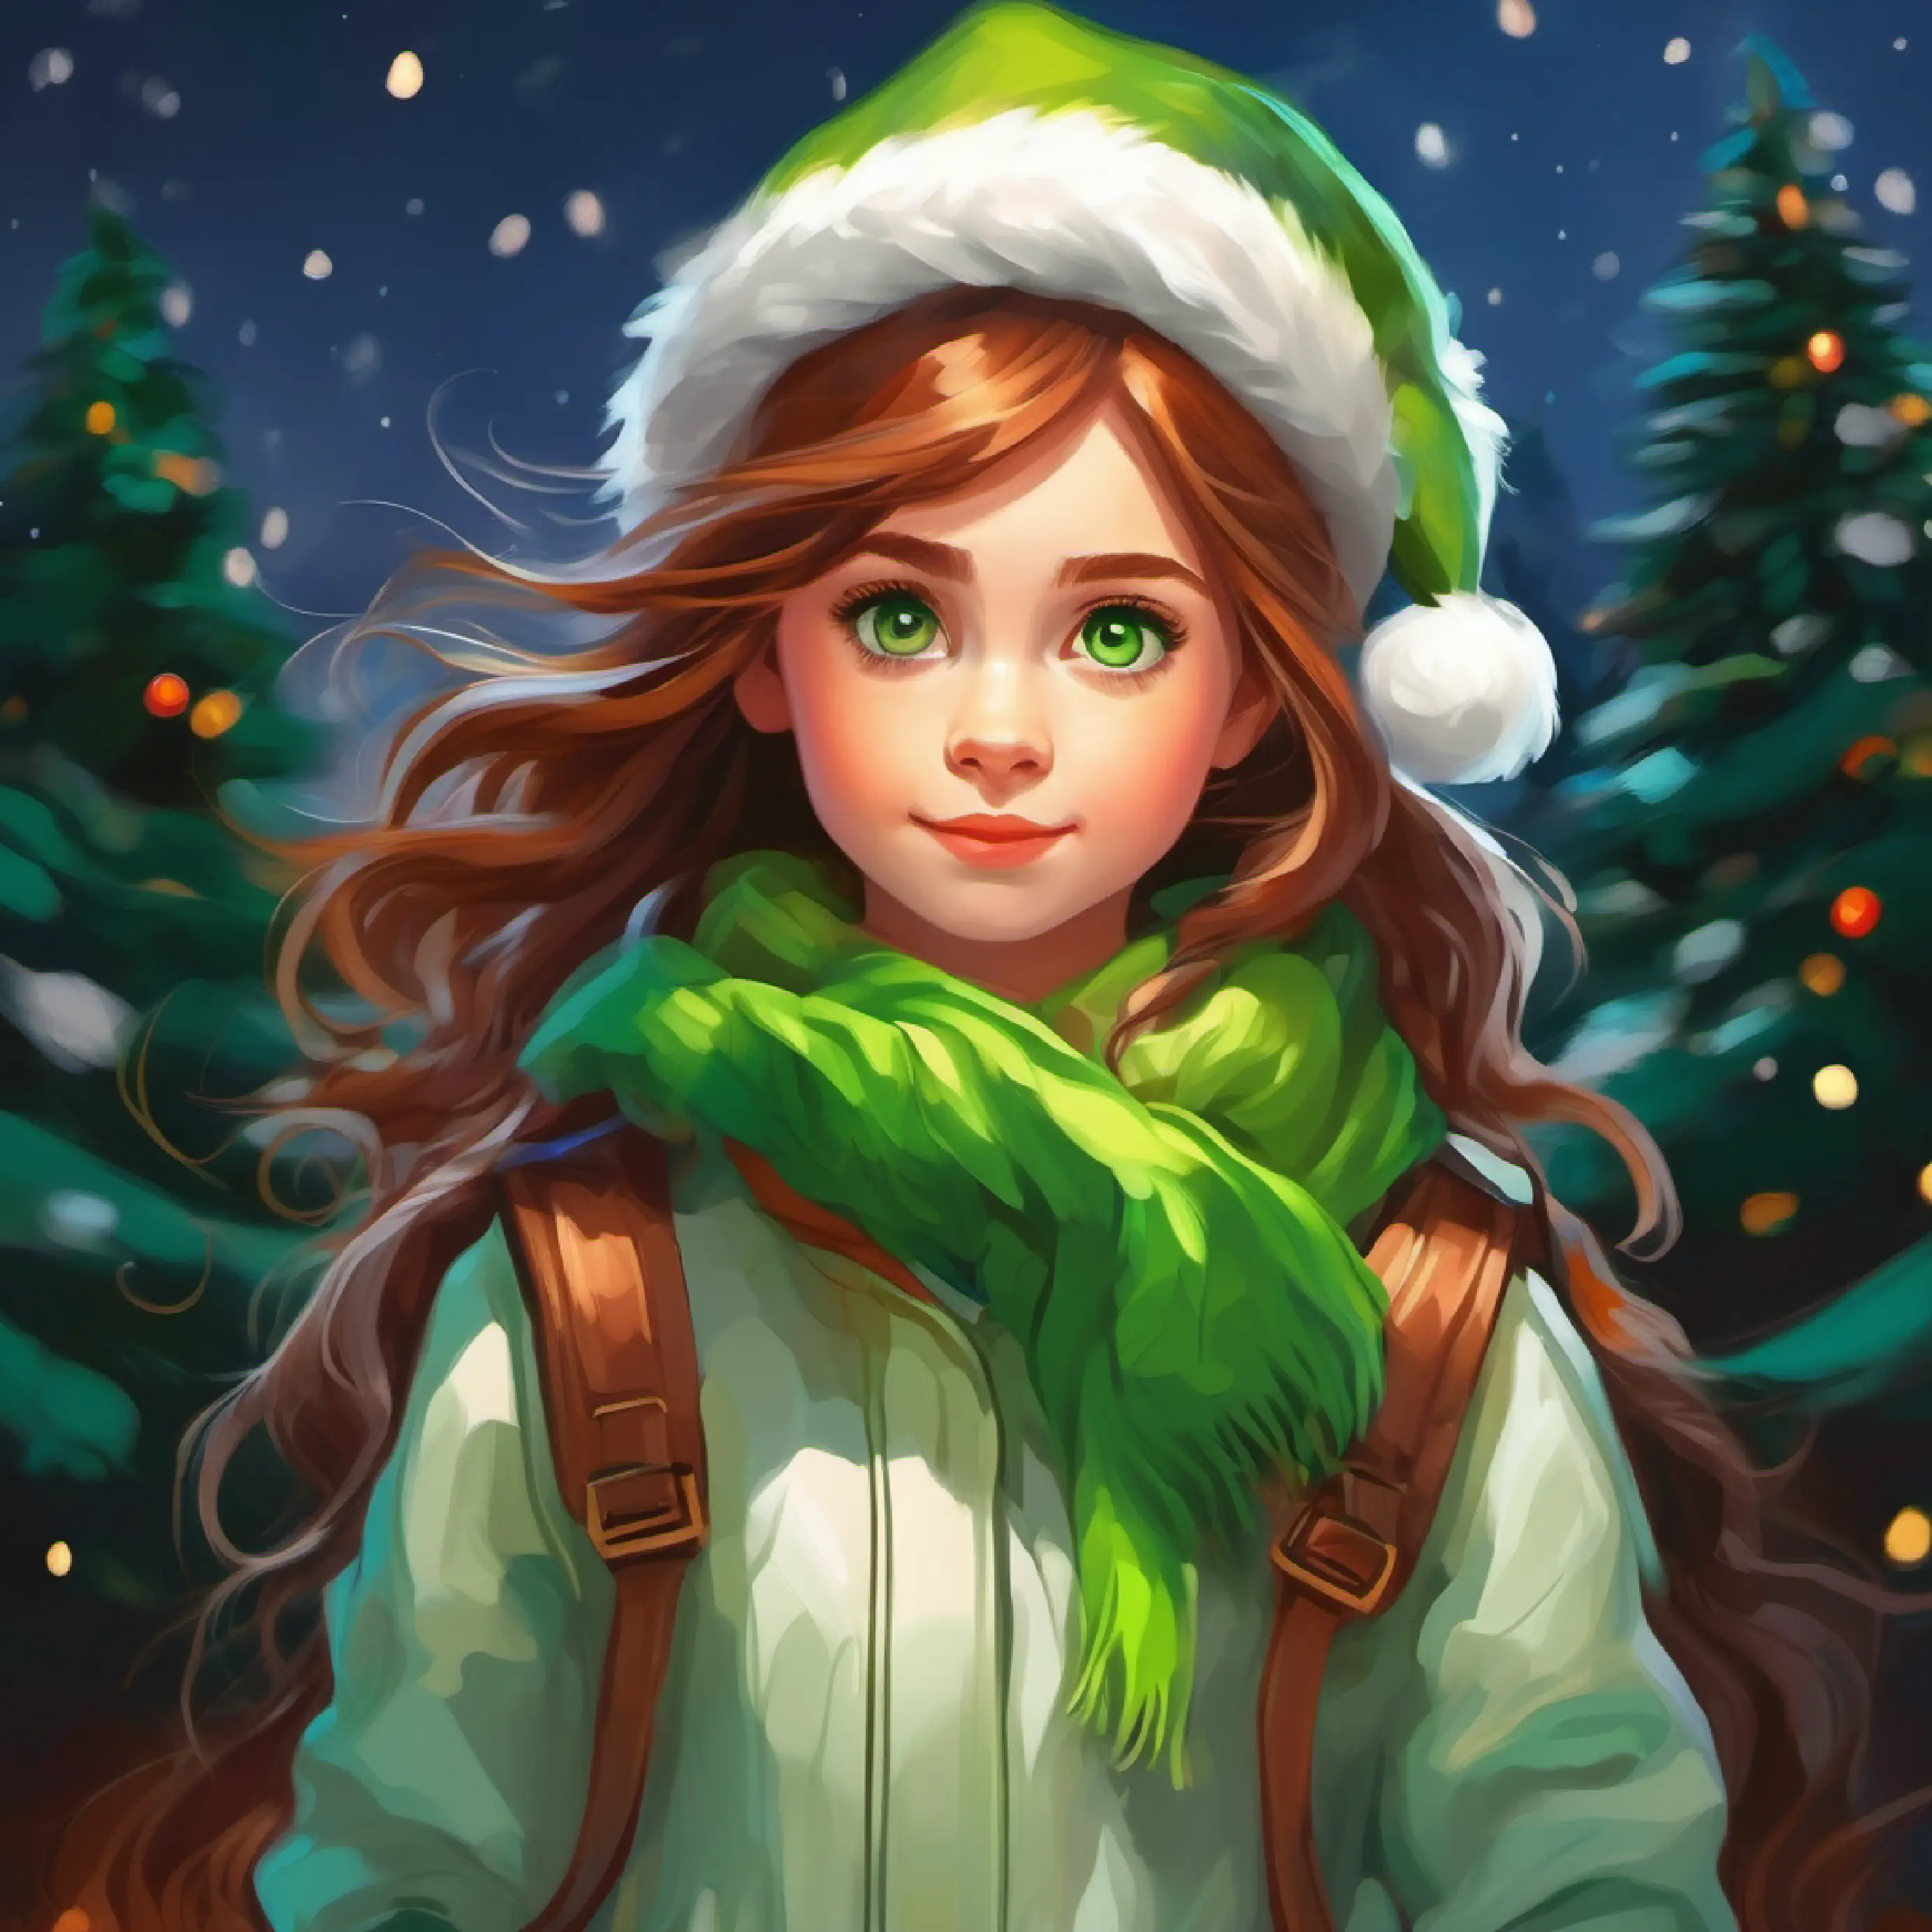 Brave young girl with flowing chestnut hair and bright green eyes's courageous and adventurous spirit displayed.